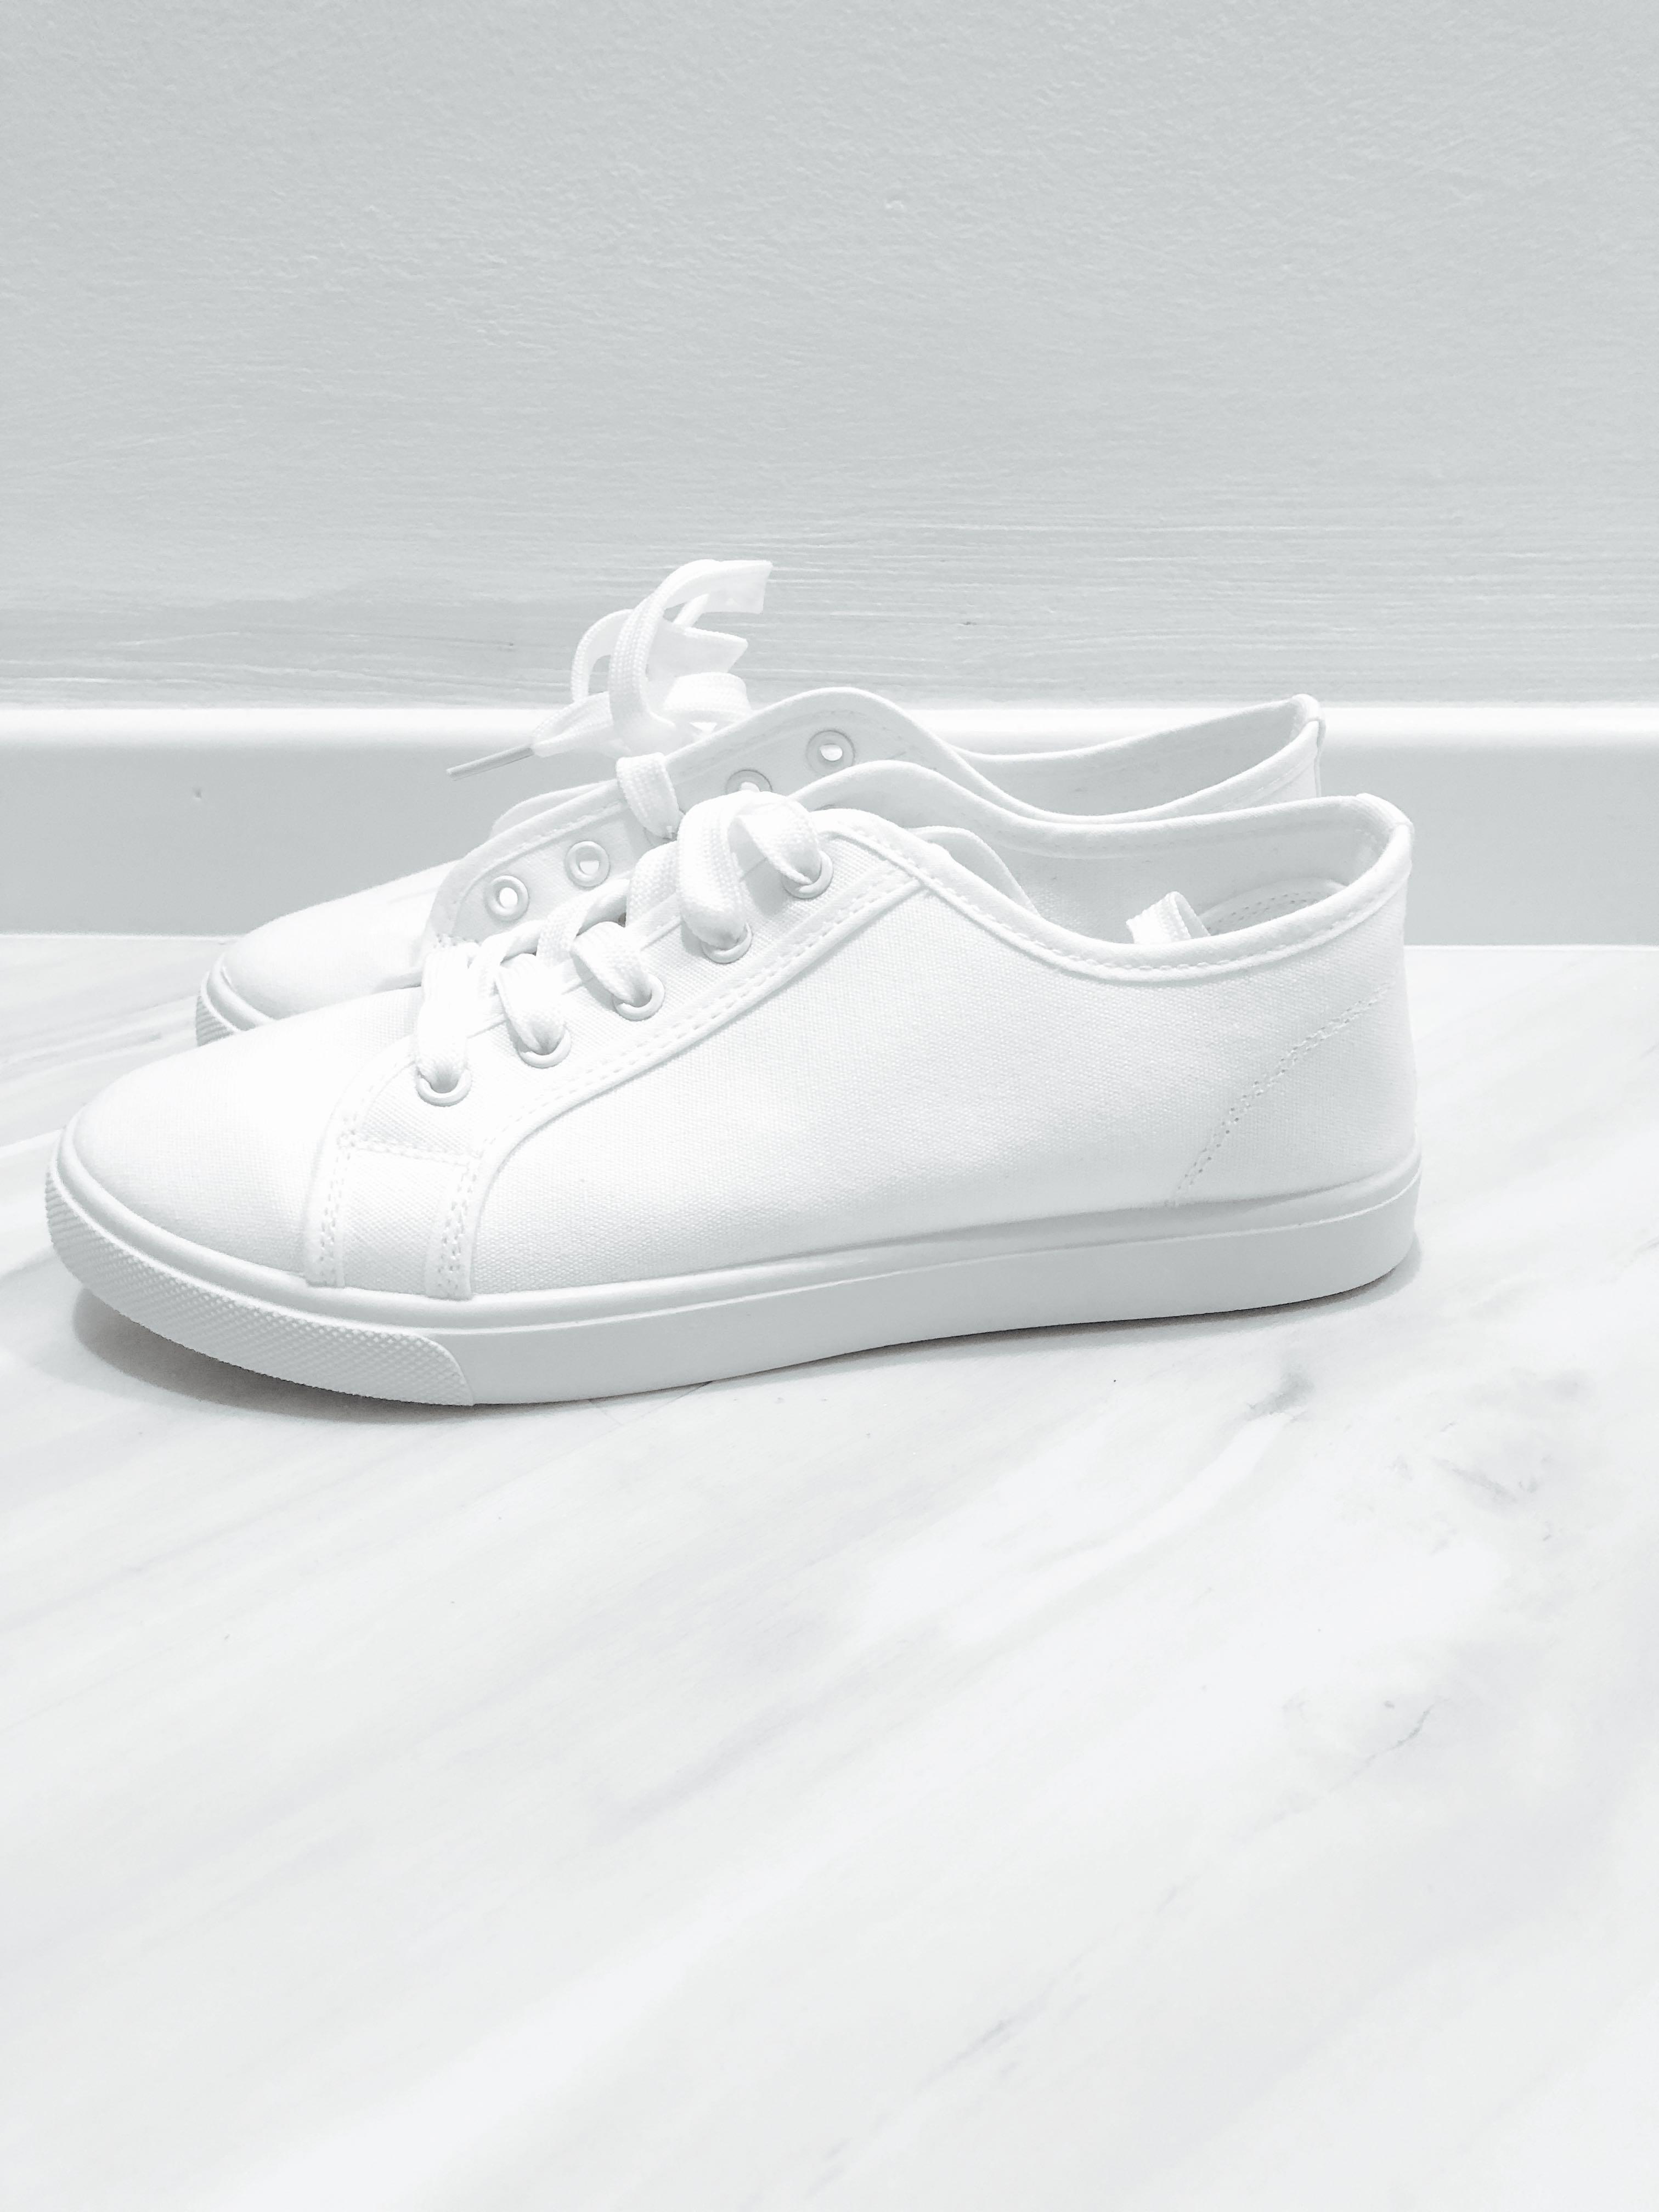 BN White Canvas Shoes Sneakers, Women's 